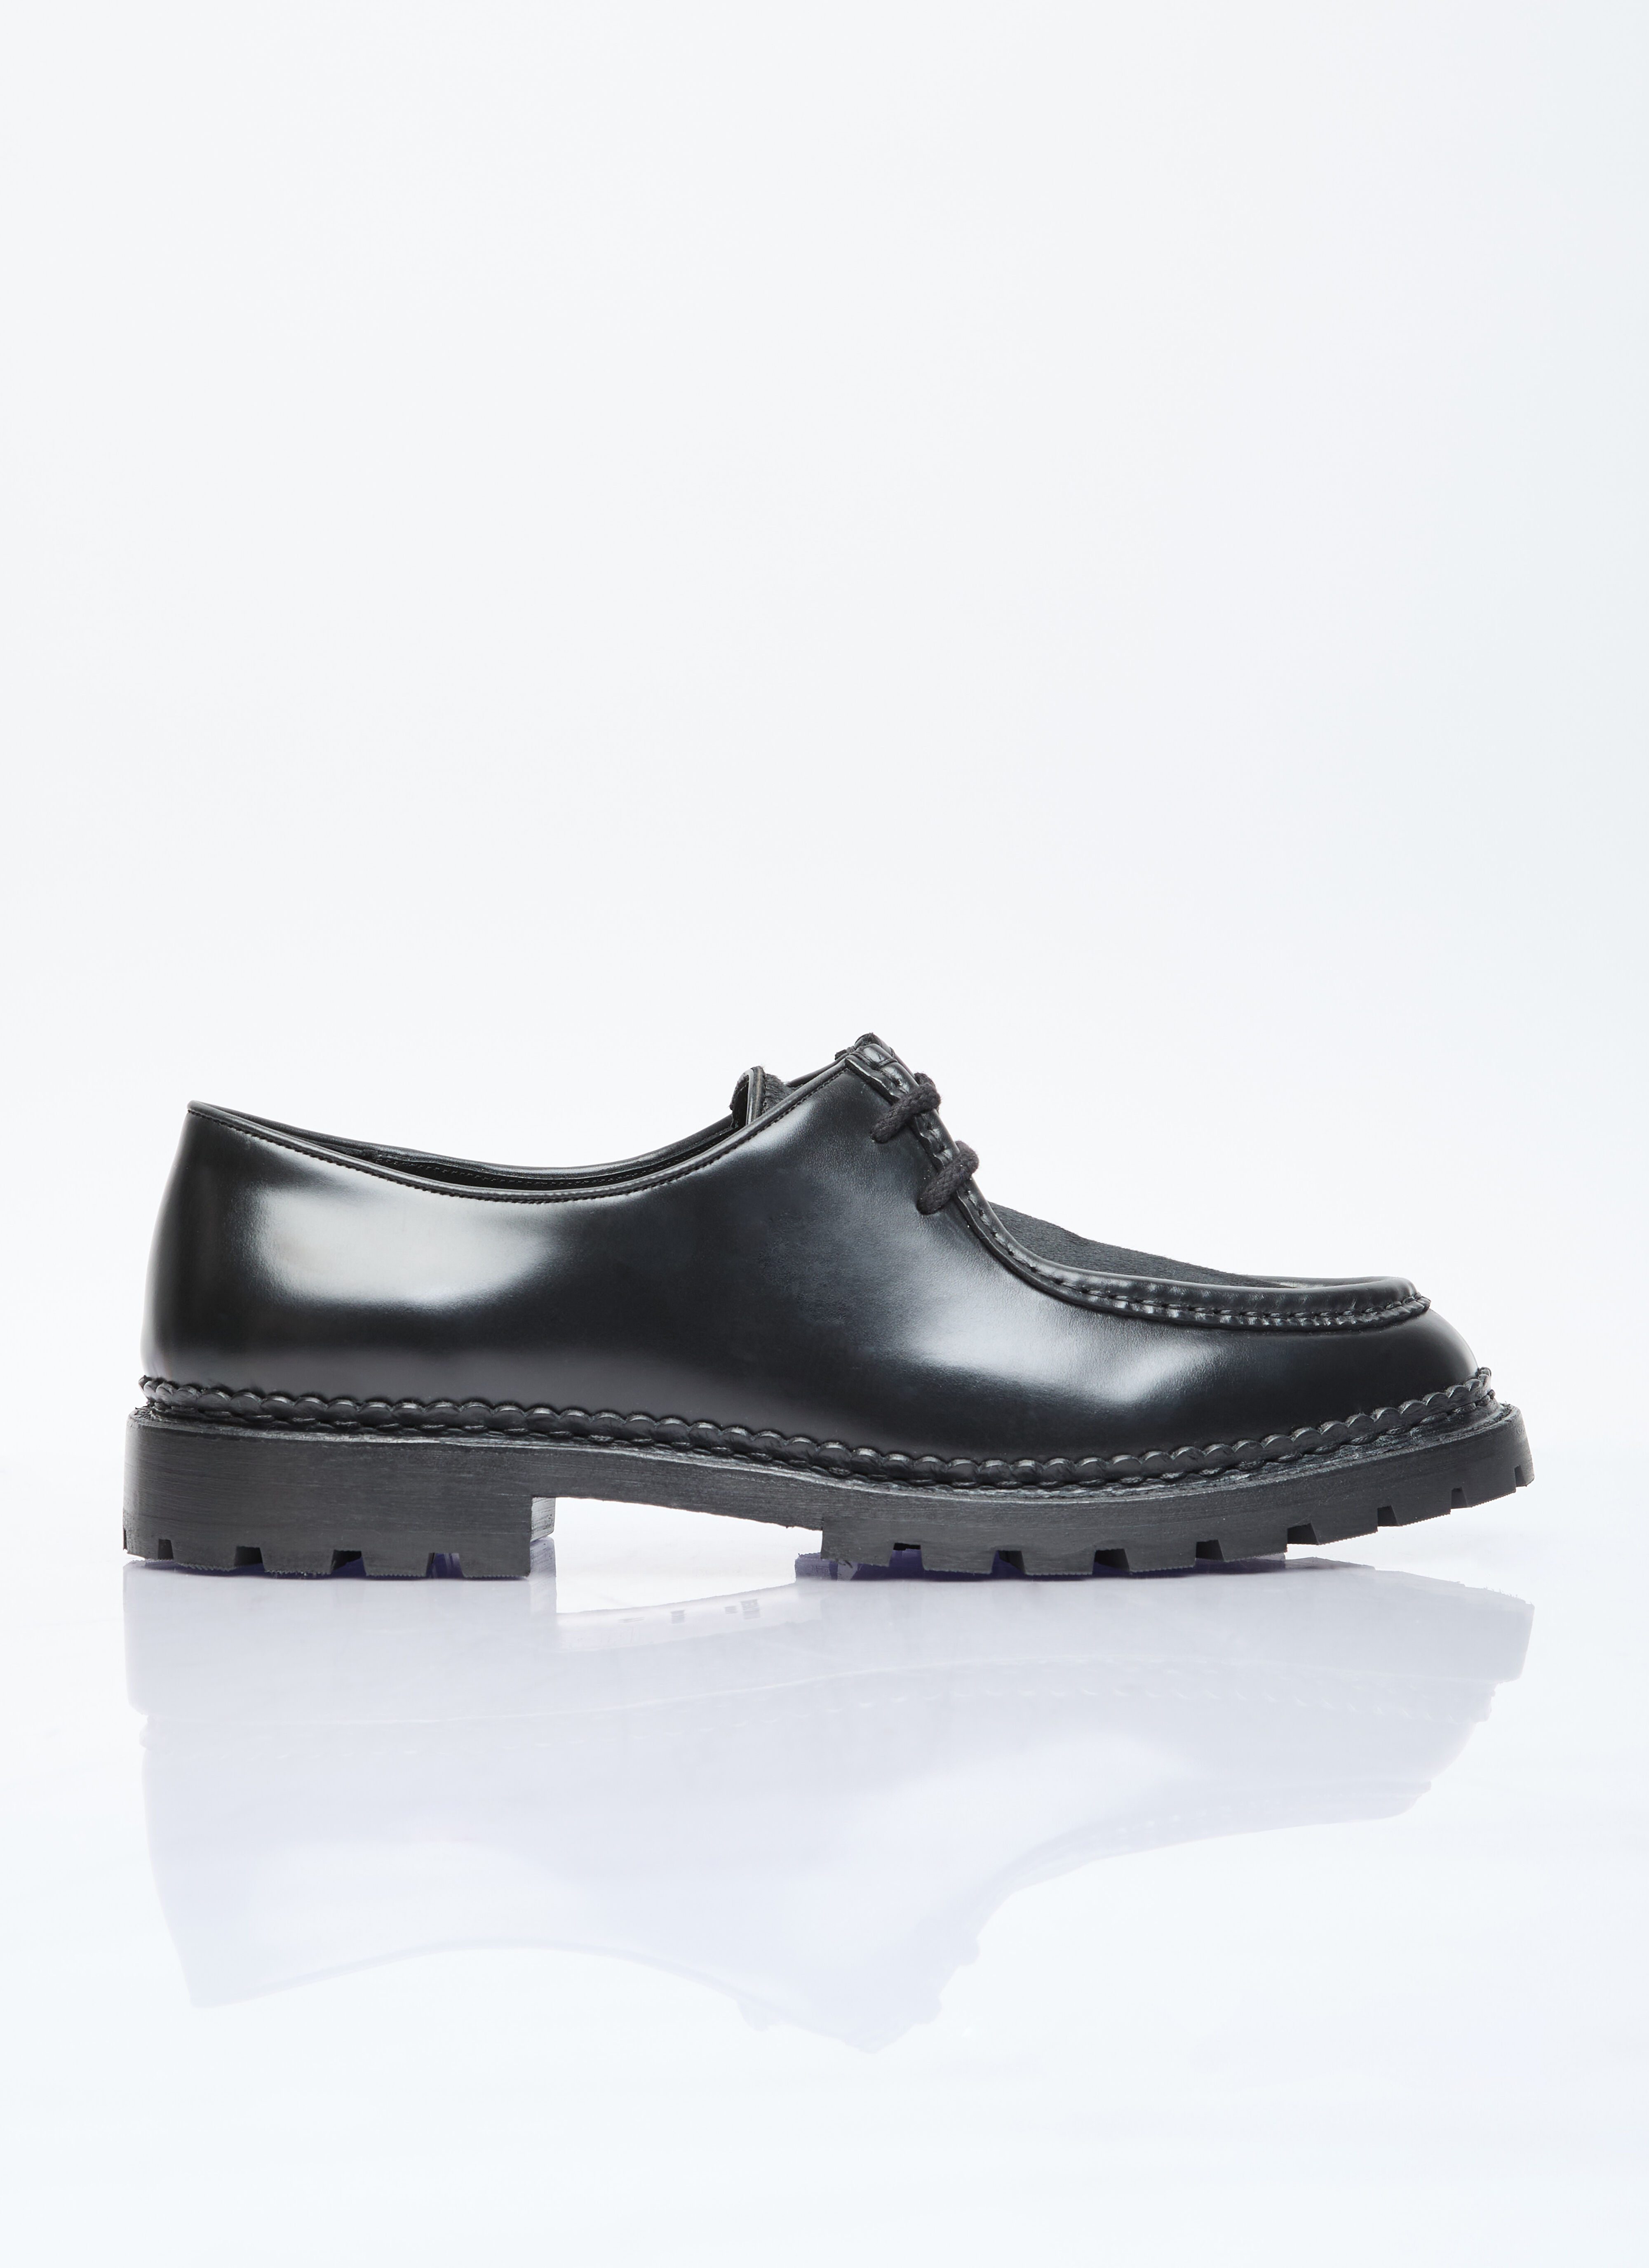 Thom Browne Ponyhair Leather Loafers Black thb0155012